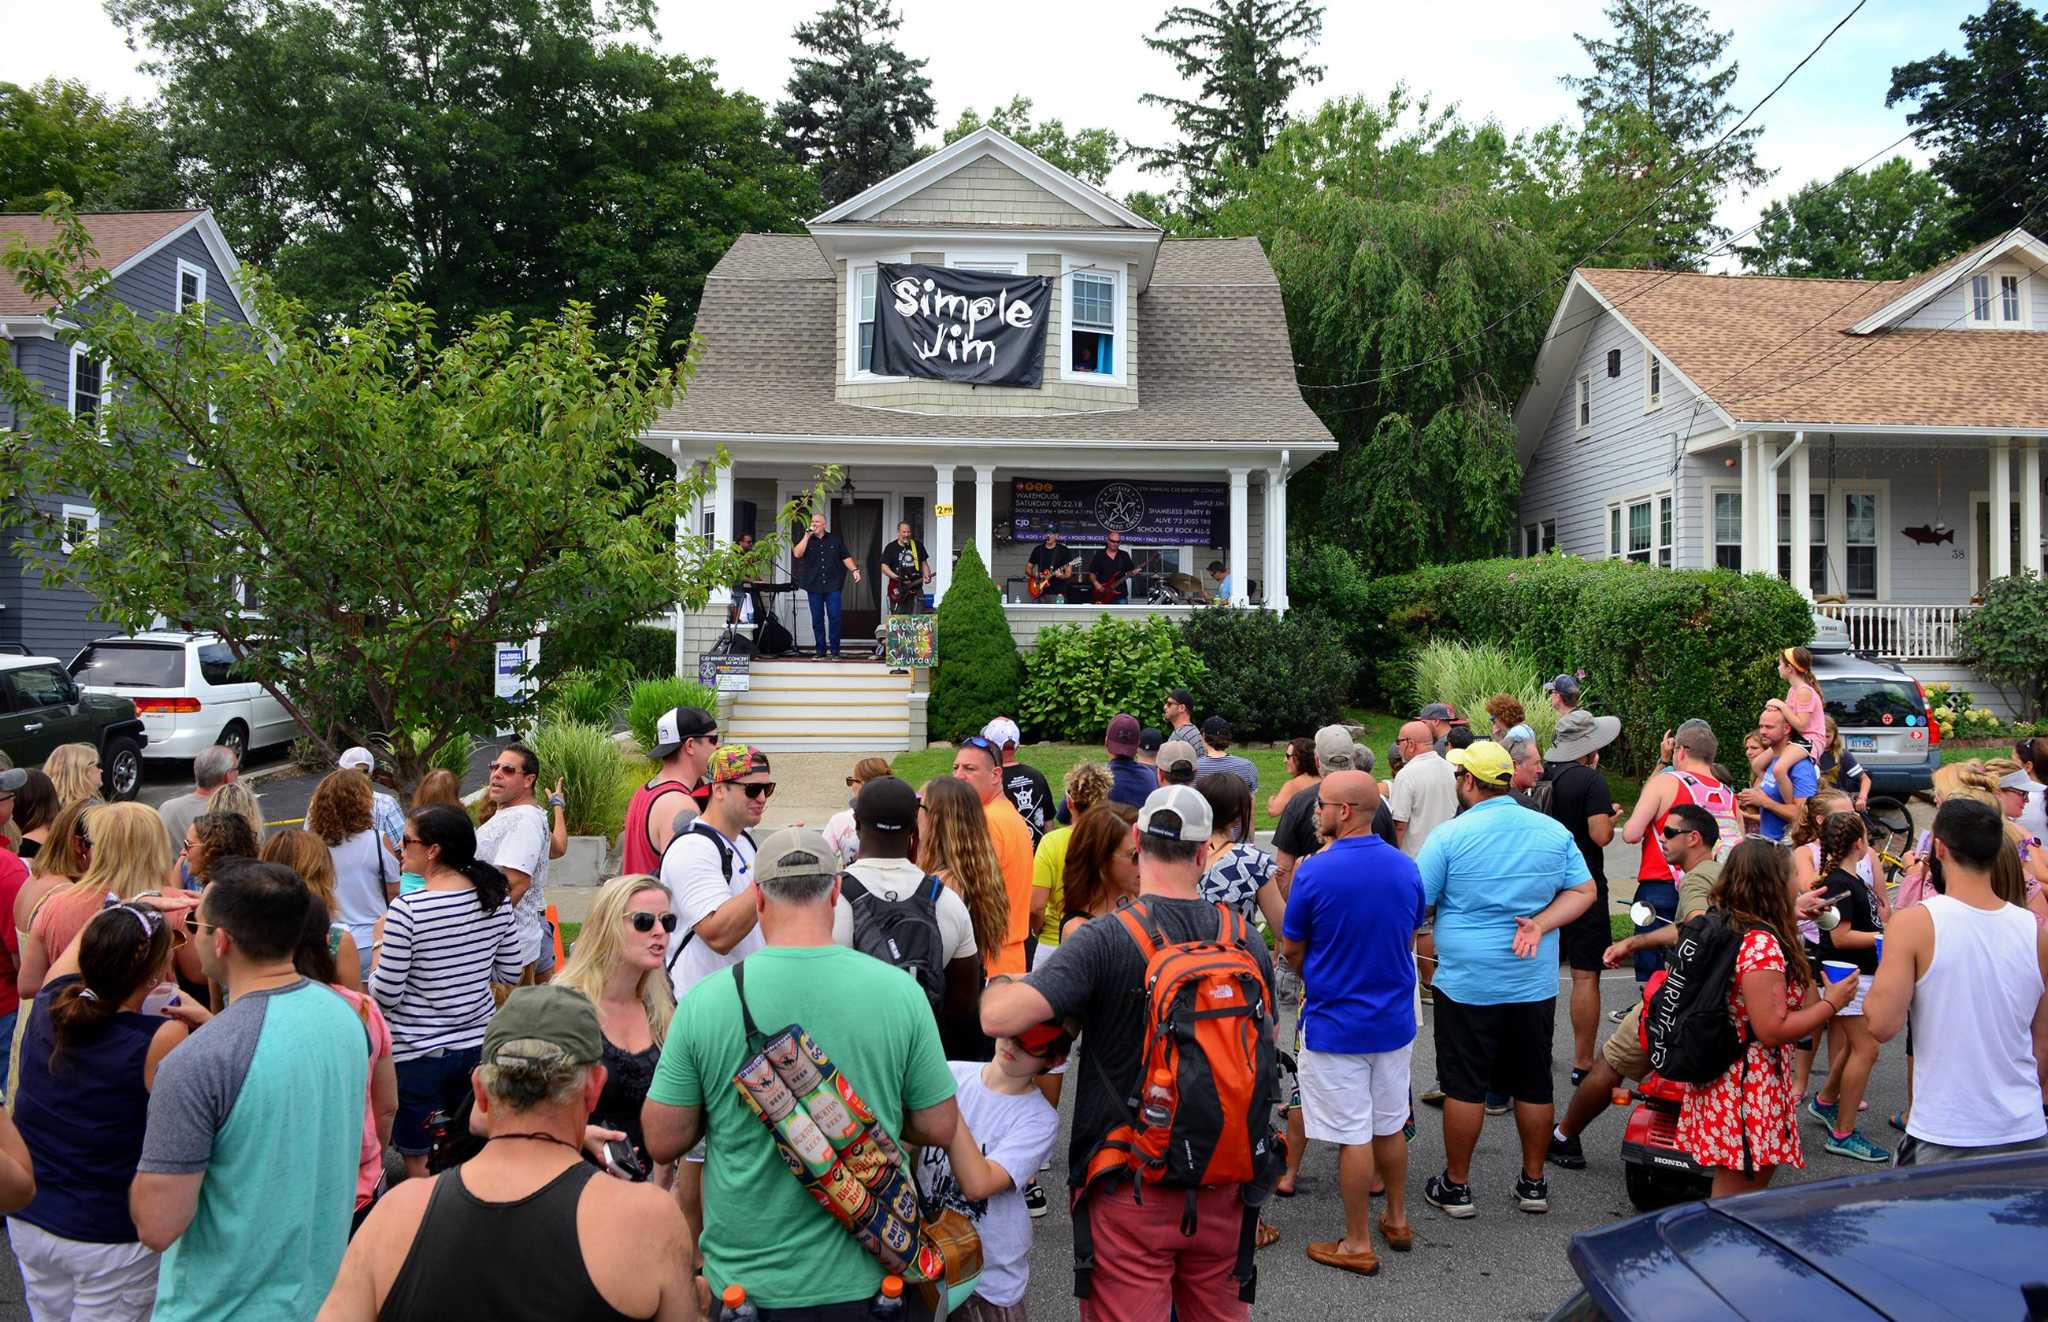 Black Rock PorchFest this weekend What to know before you go